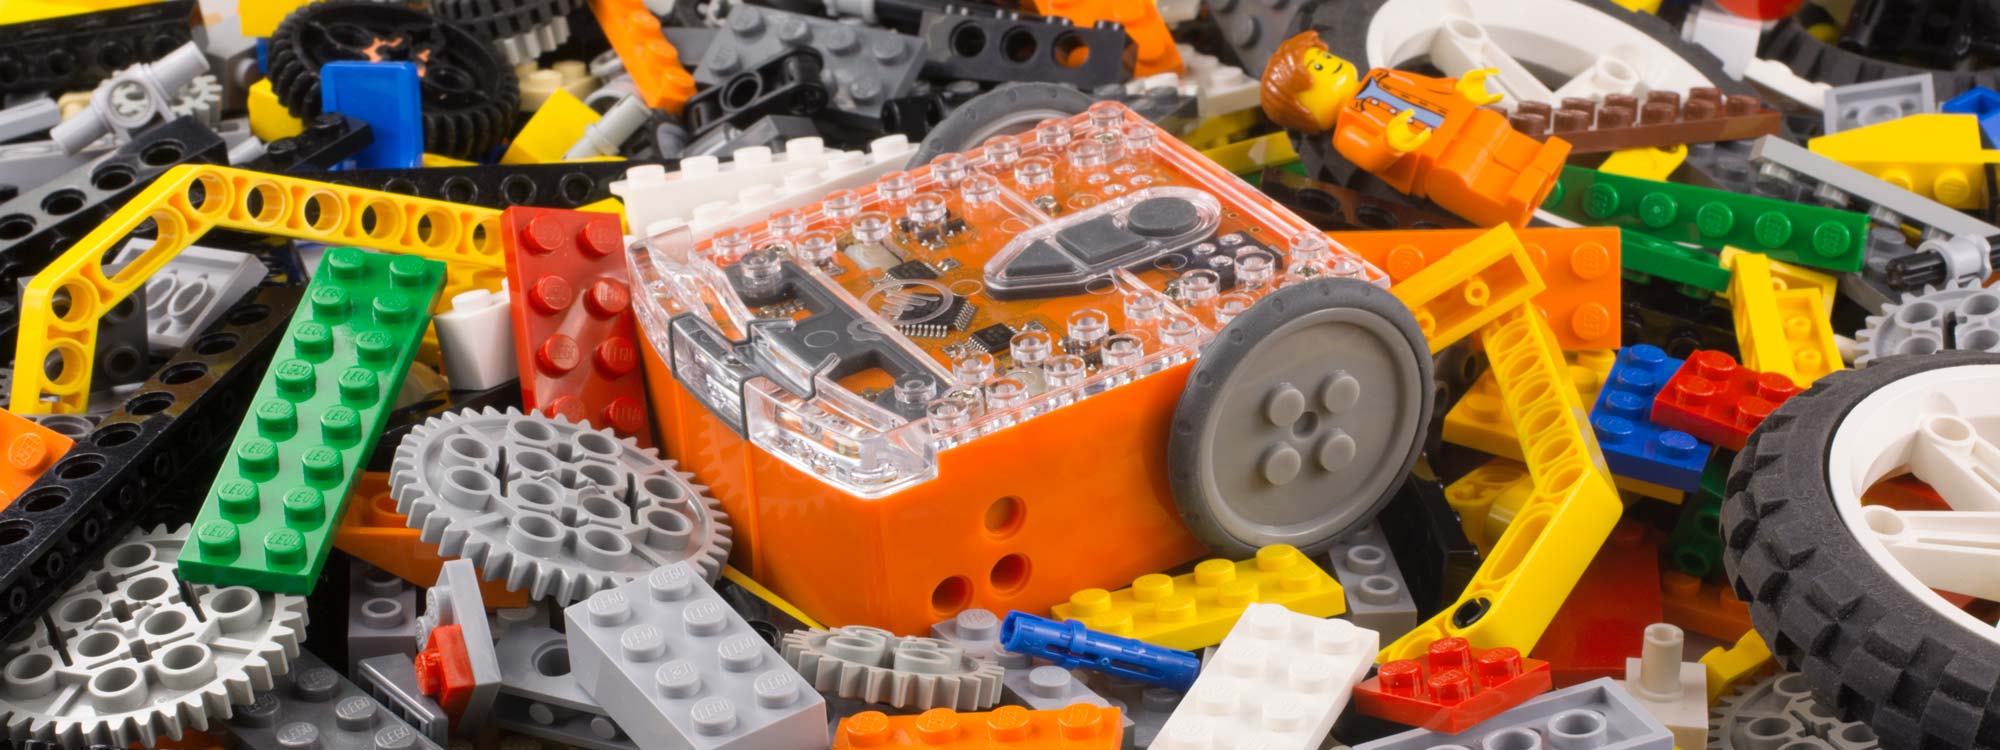 The Edison robot is Lego compatible